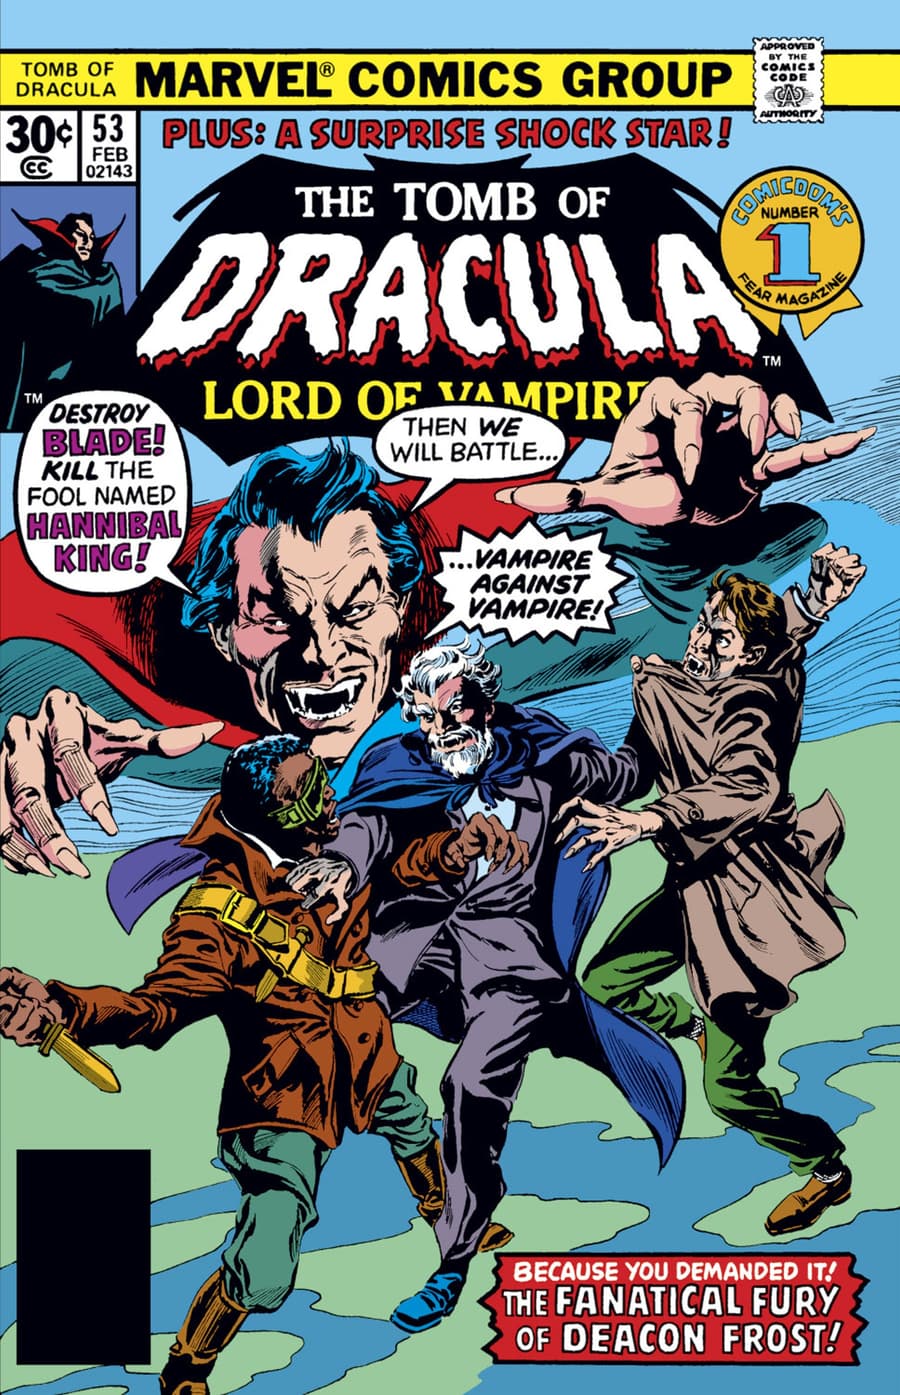 TOMB OF DRACULA (1972) #53 cover by Gene Colan